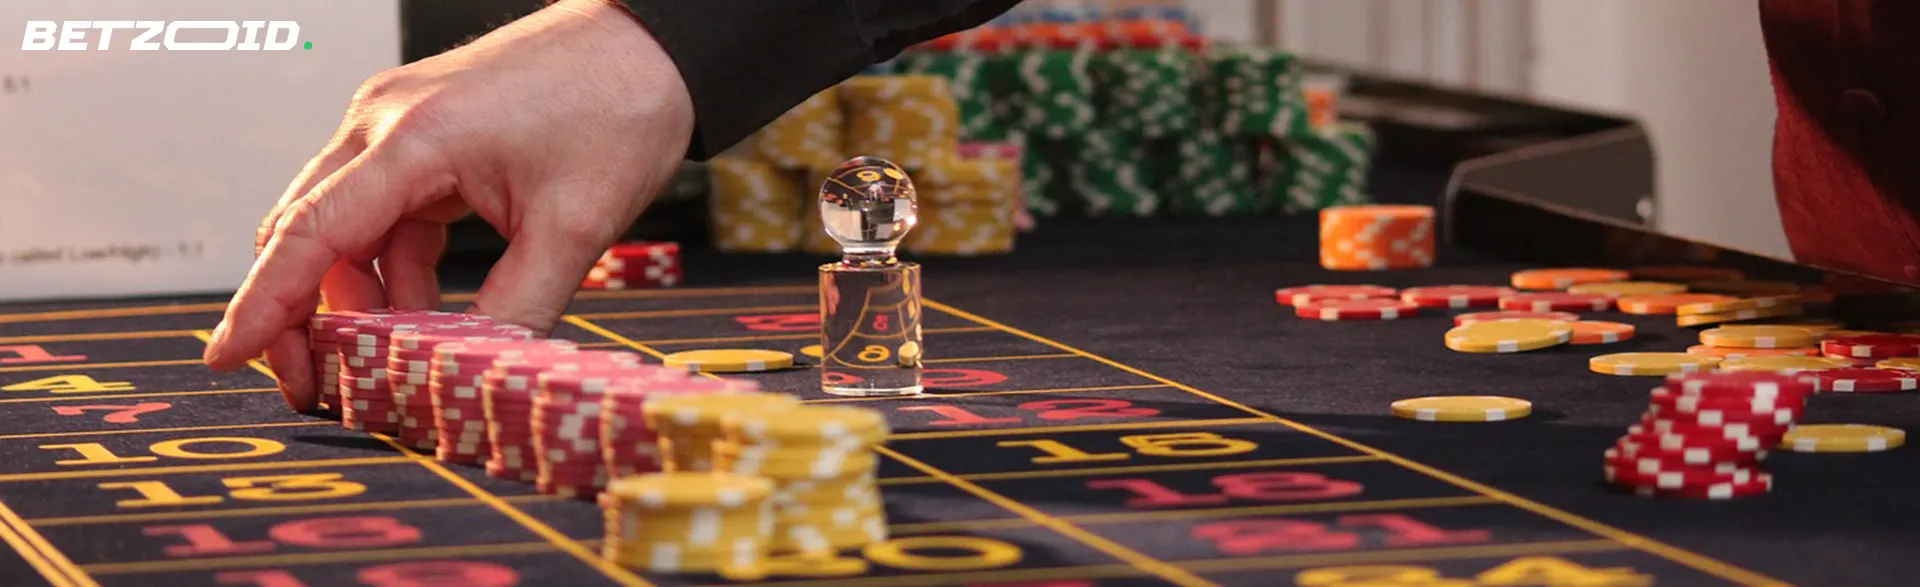 A dealer's hand moving chips on a blackjack table, with cards and chip stacks.